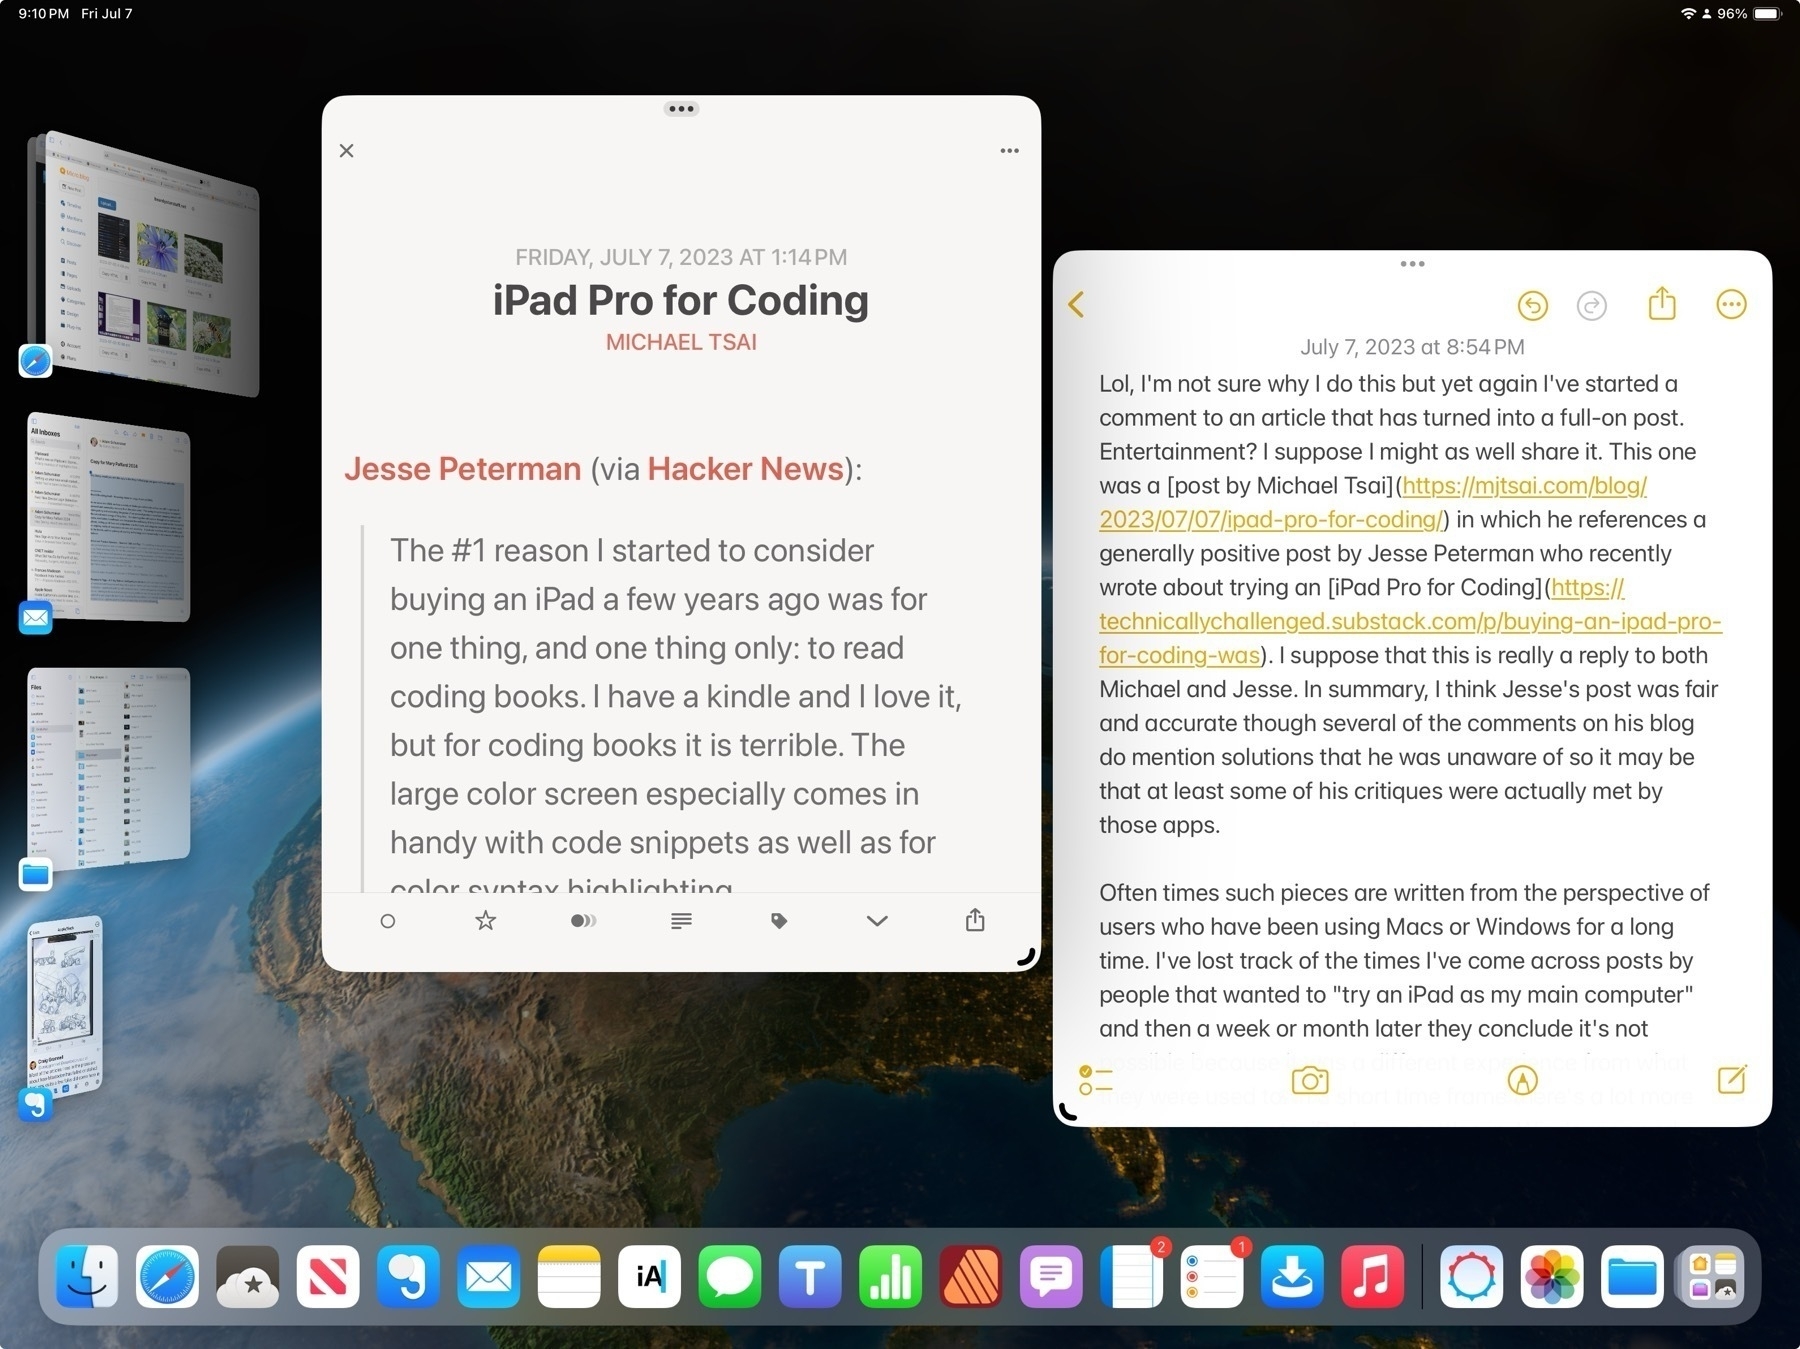 A screenshot of an iPad shows two apps being used. The app Reeder on the left and this post being written in Apple Notes on the right.